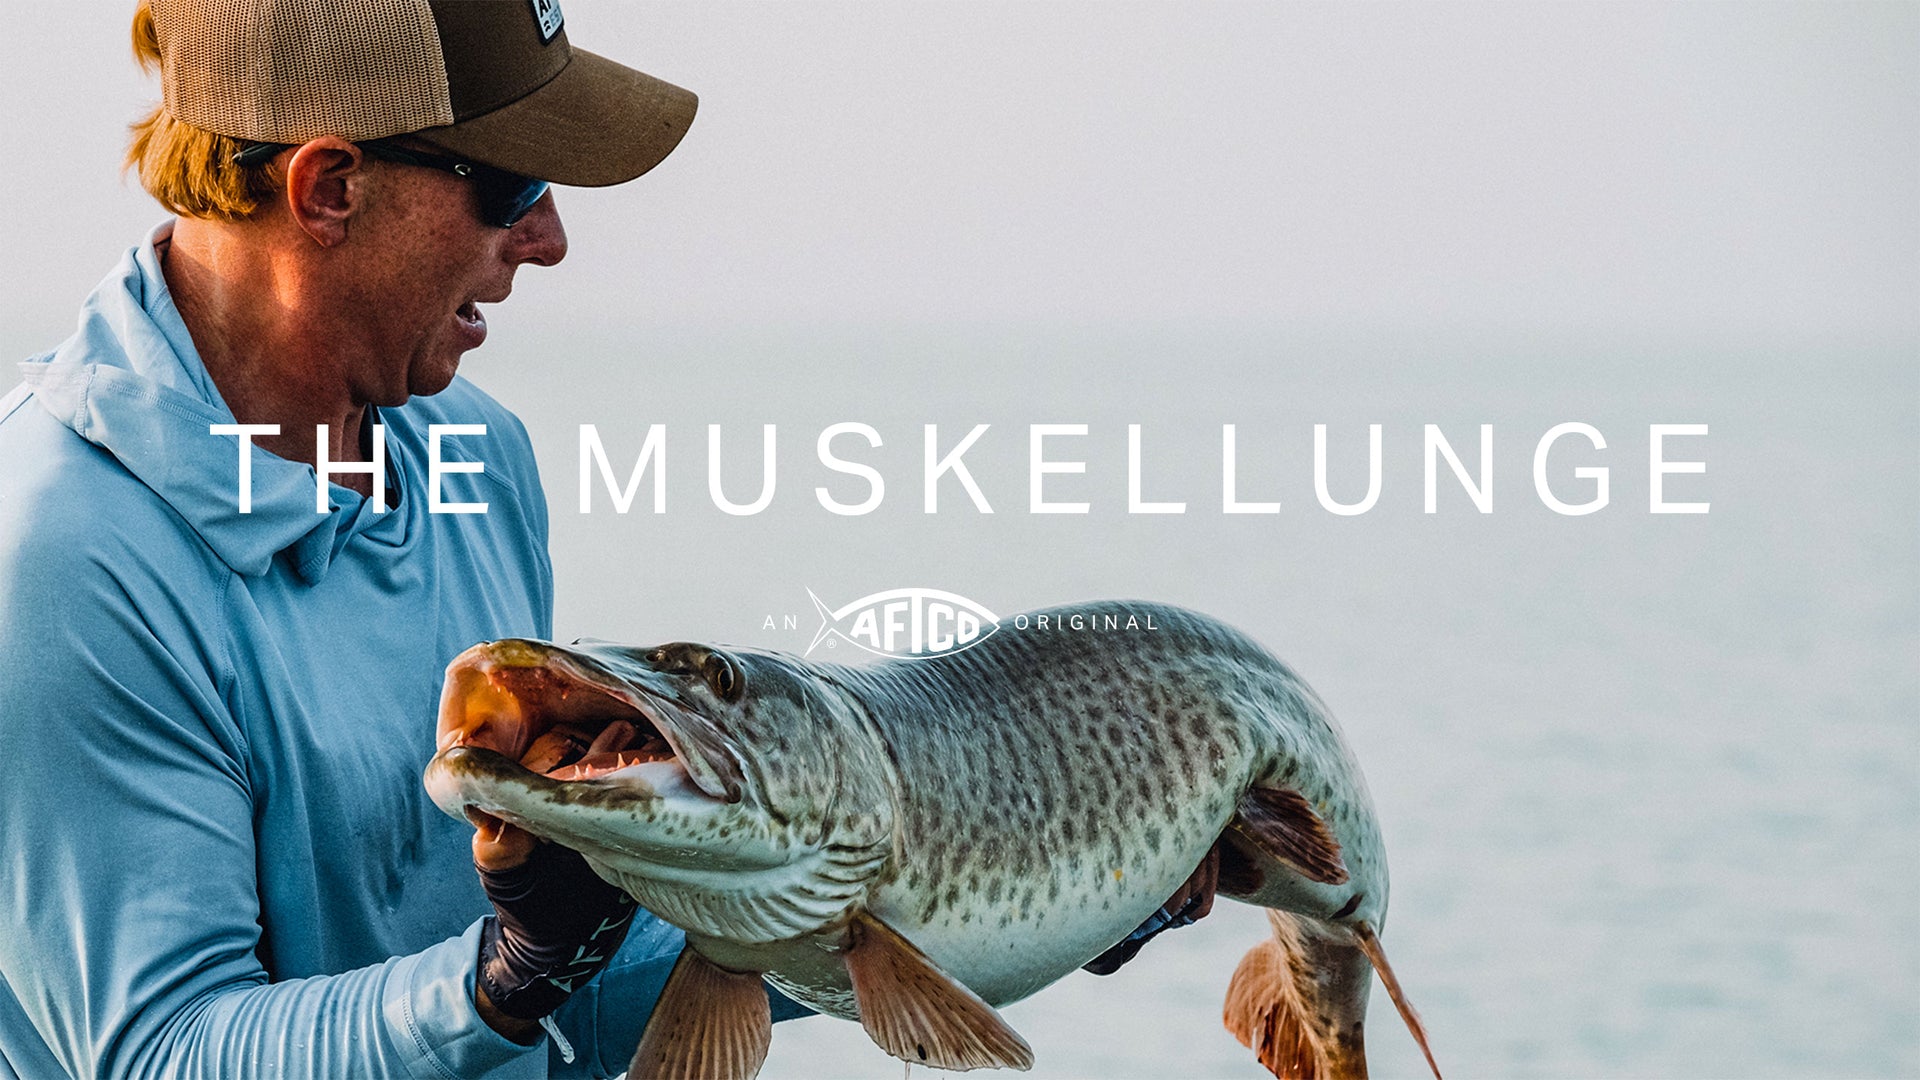 Any Fish, Any Water: The Muskellunge